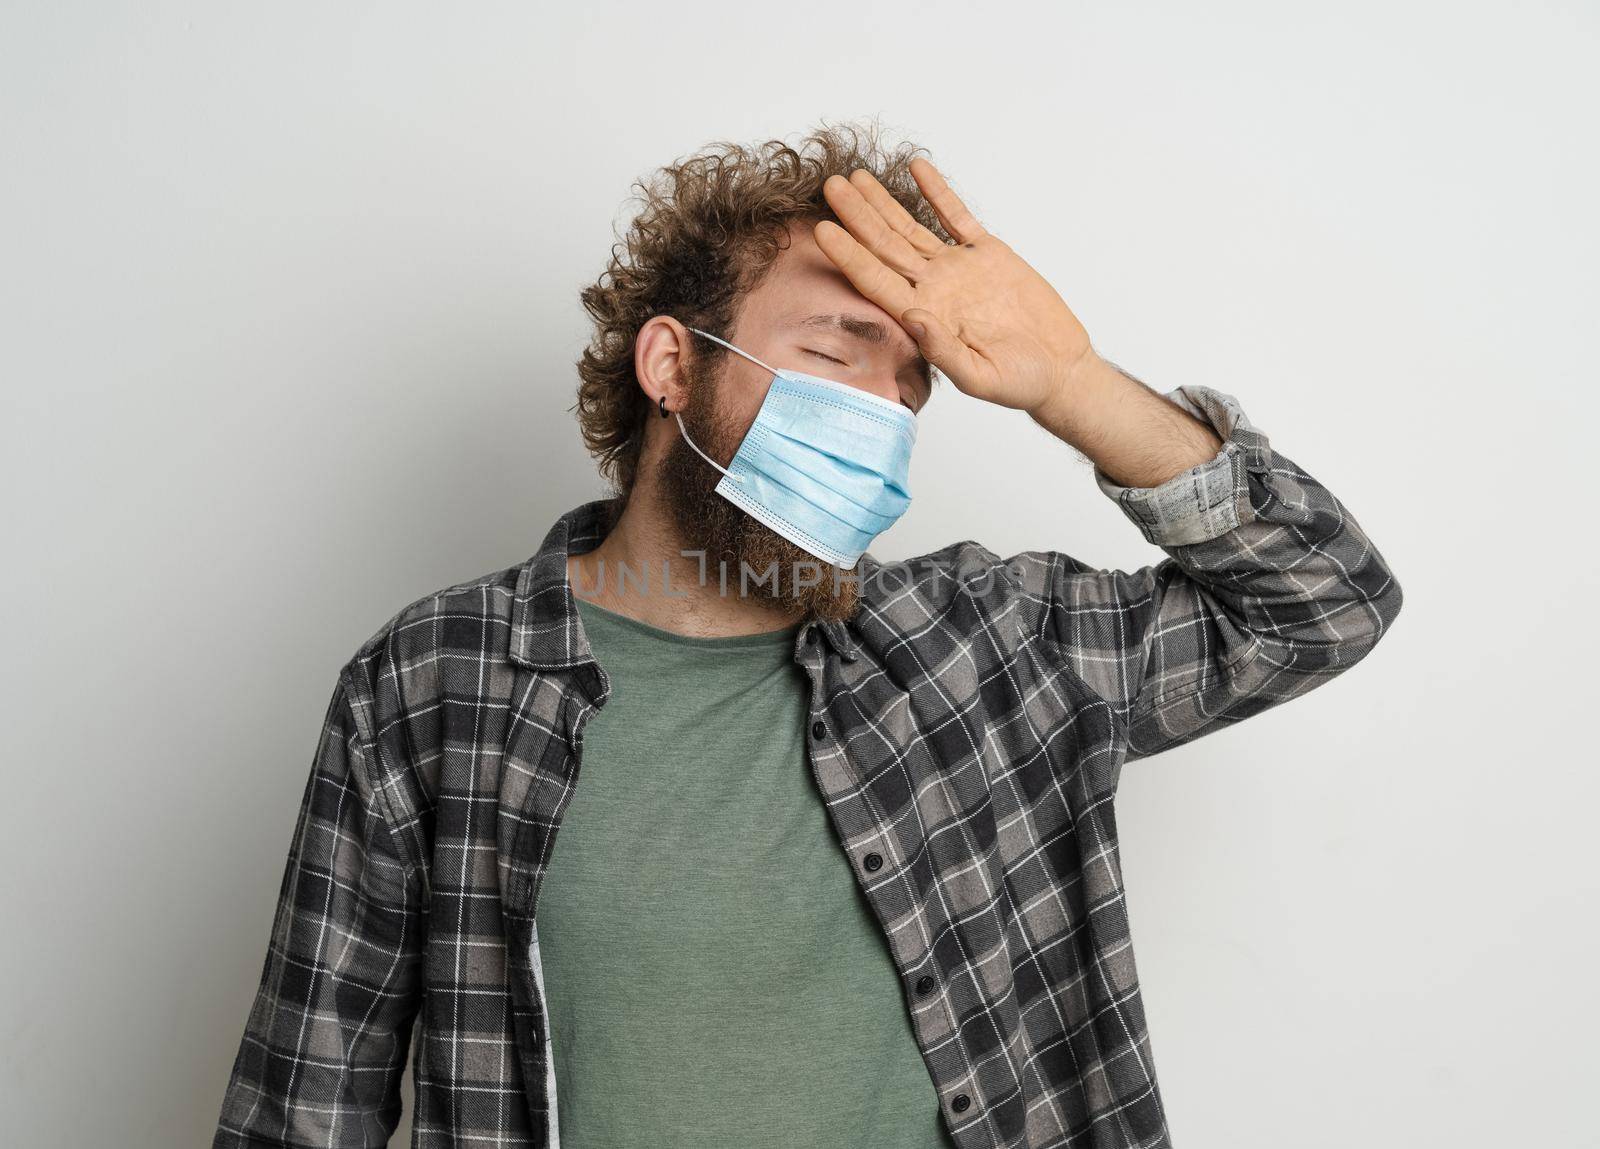 Feeling high temperature young man wearing protective sterile medical mask on his face to protect coronavirus curly hair in plaid shirt and olive t-shirt under. Medicine concept. White background.